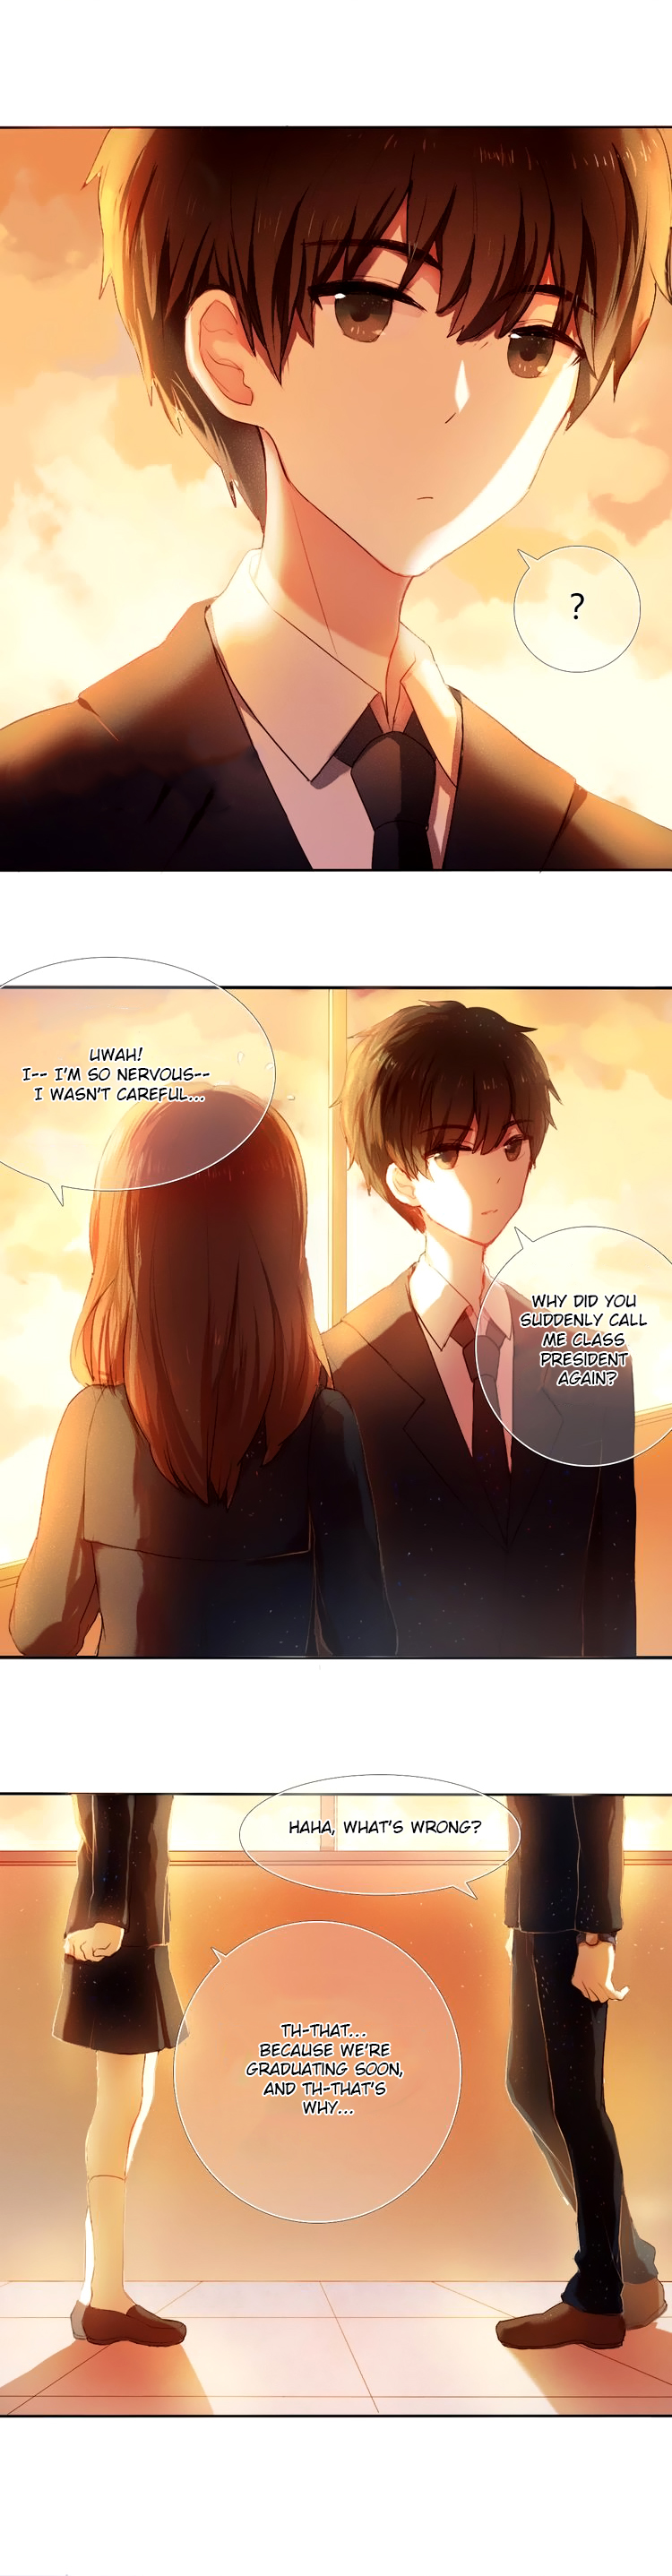 Heart Beat Plan Ch. 1 The Confession That I Cannot Convey